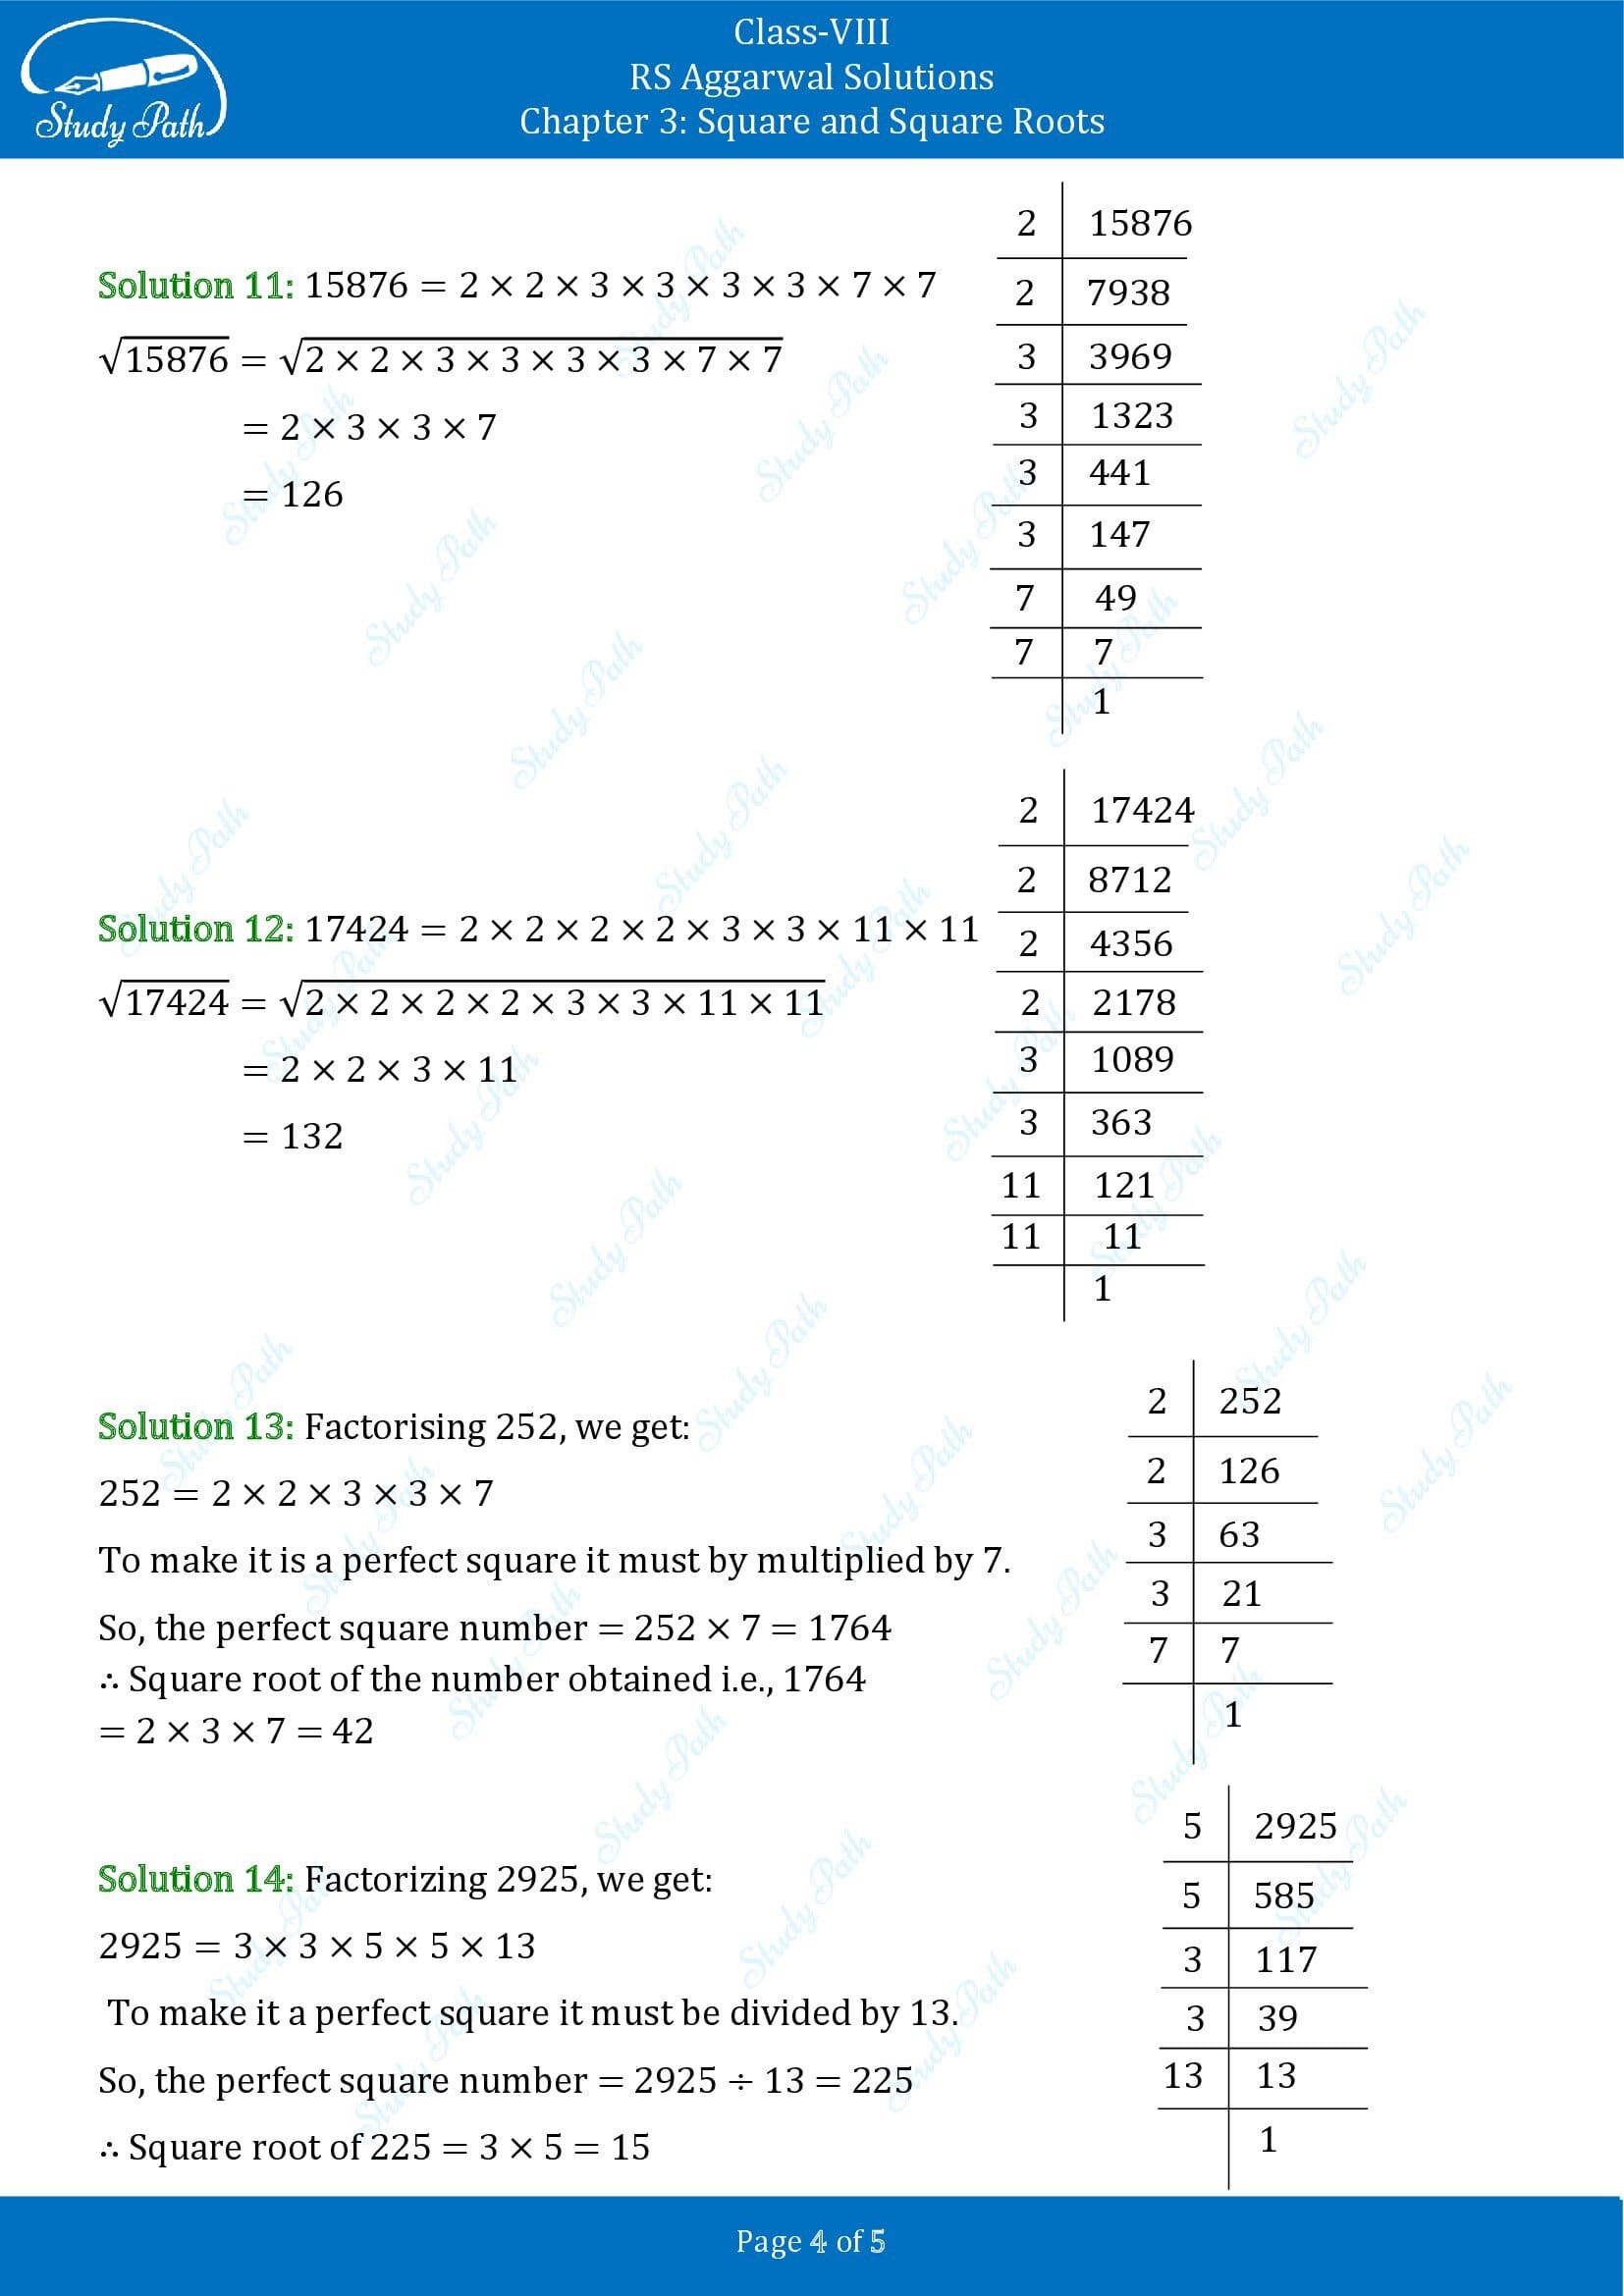 RS Aggarwal Solutions Class 8 Chapter 3 Square and Square Roots Exercise 3D 0004